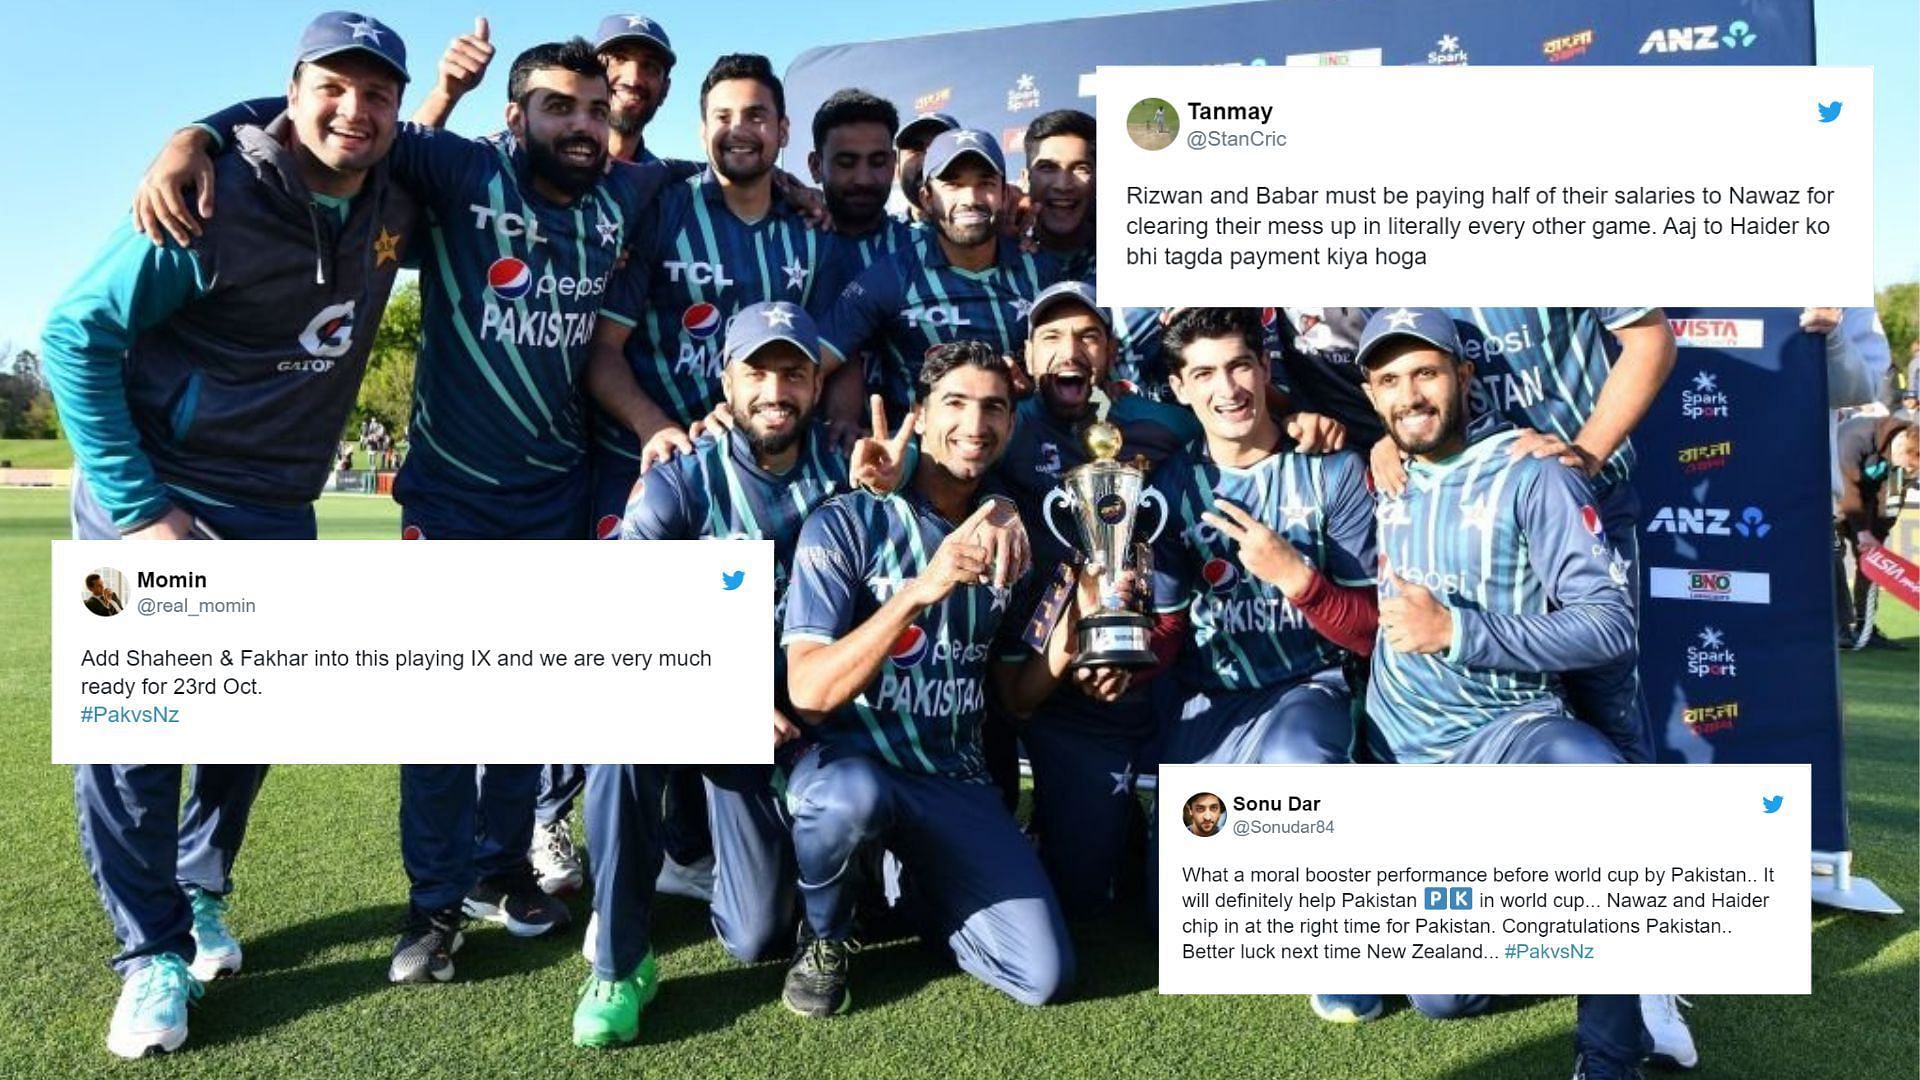 &quot;Rizwan and Babar must be paying half of their salaries to Nawaz&quot; - Pakistan fans jubilant after middle-order clicks to secure tri-series win over New Zealand 